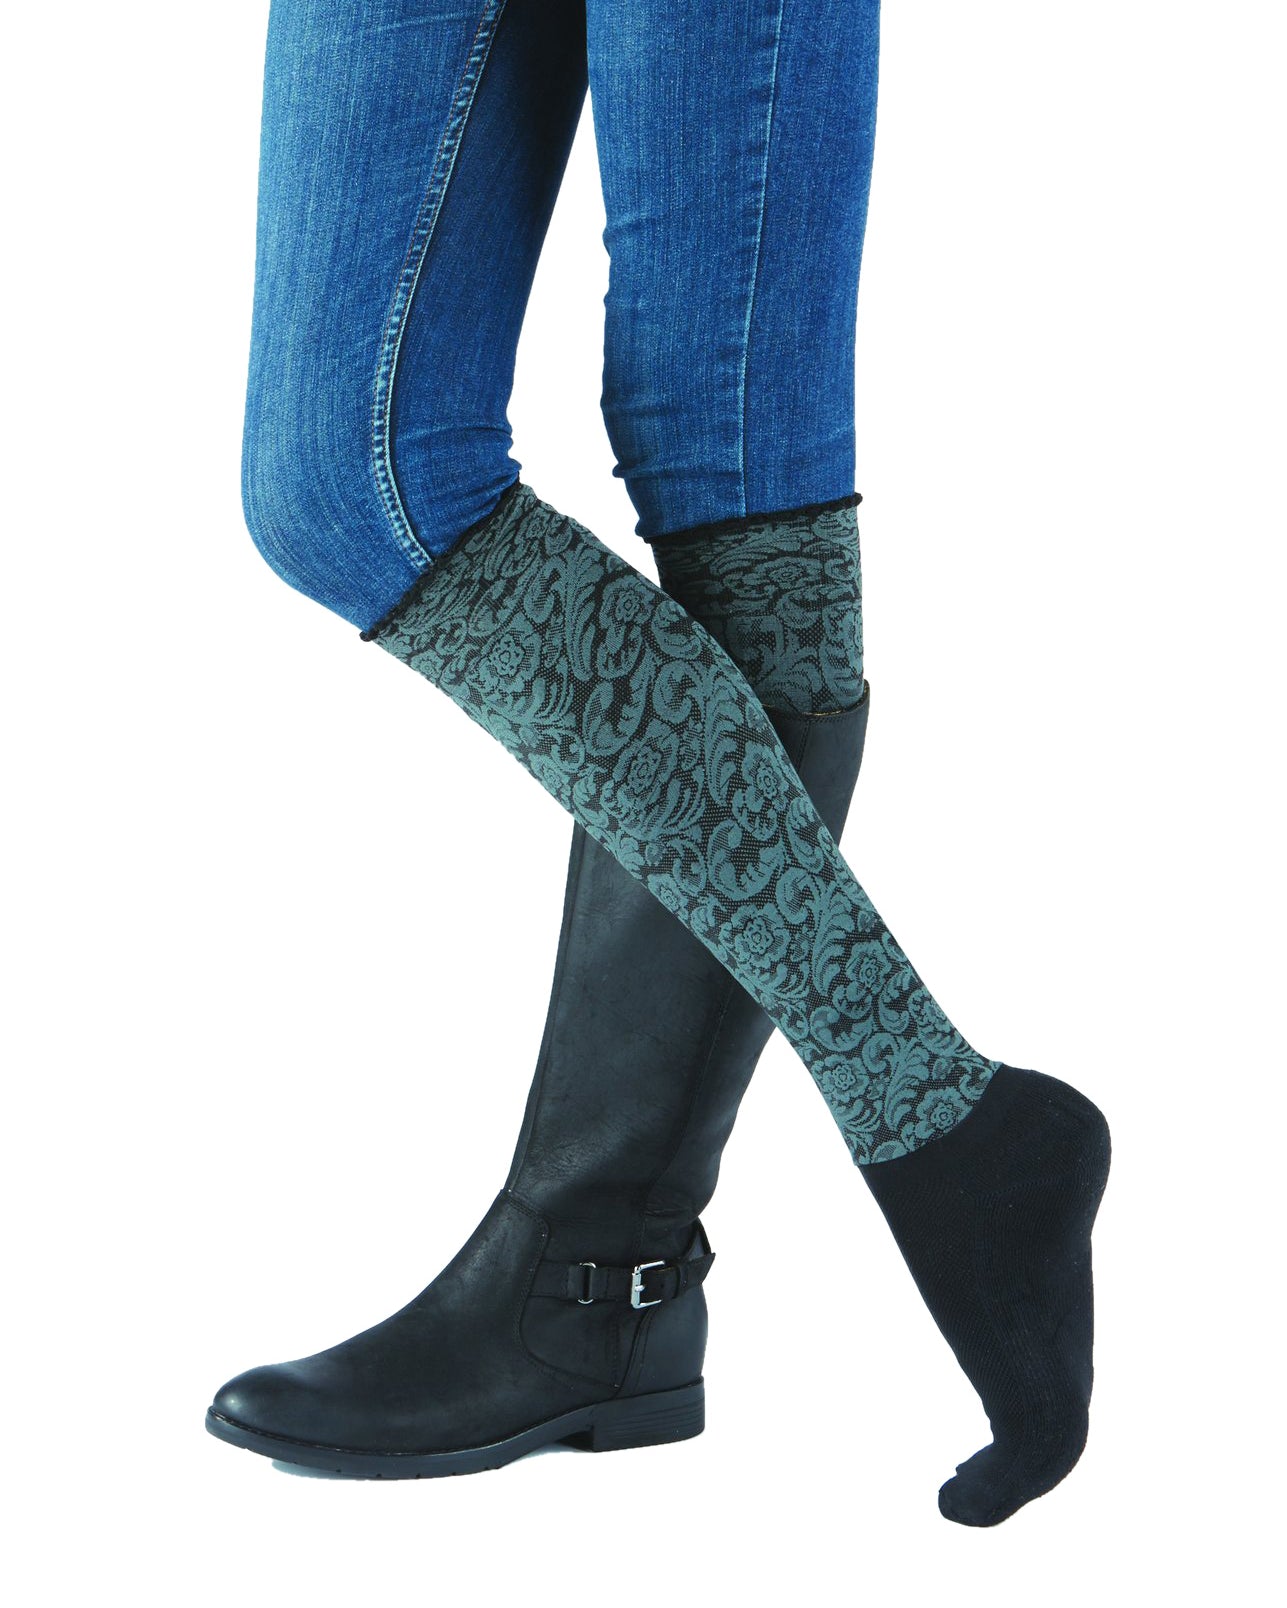 Sleek compression sock design in a floral print and attached performance athletic sock. 